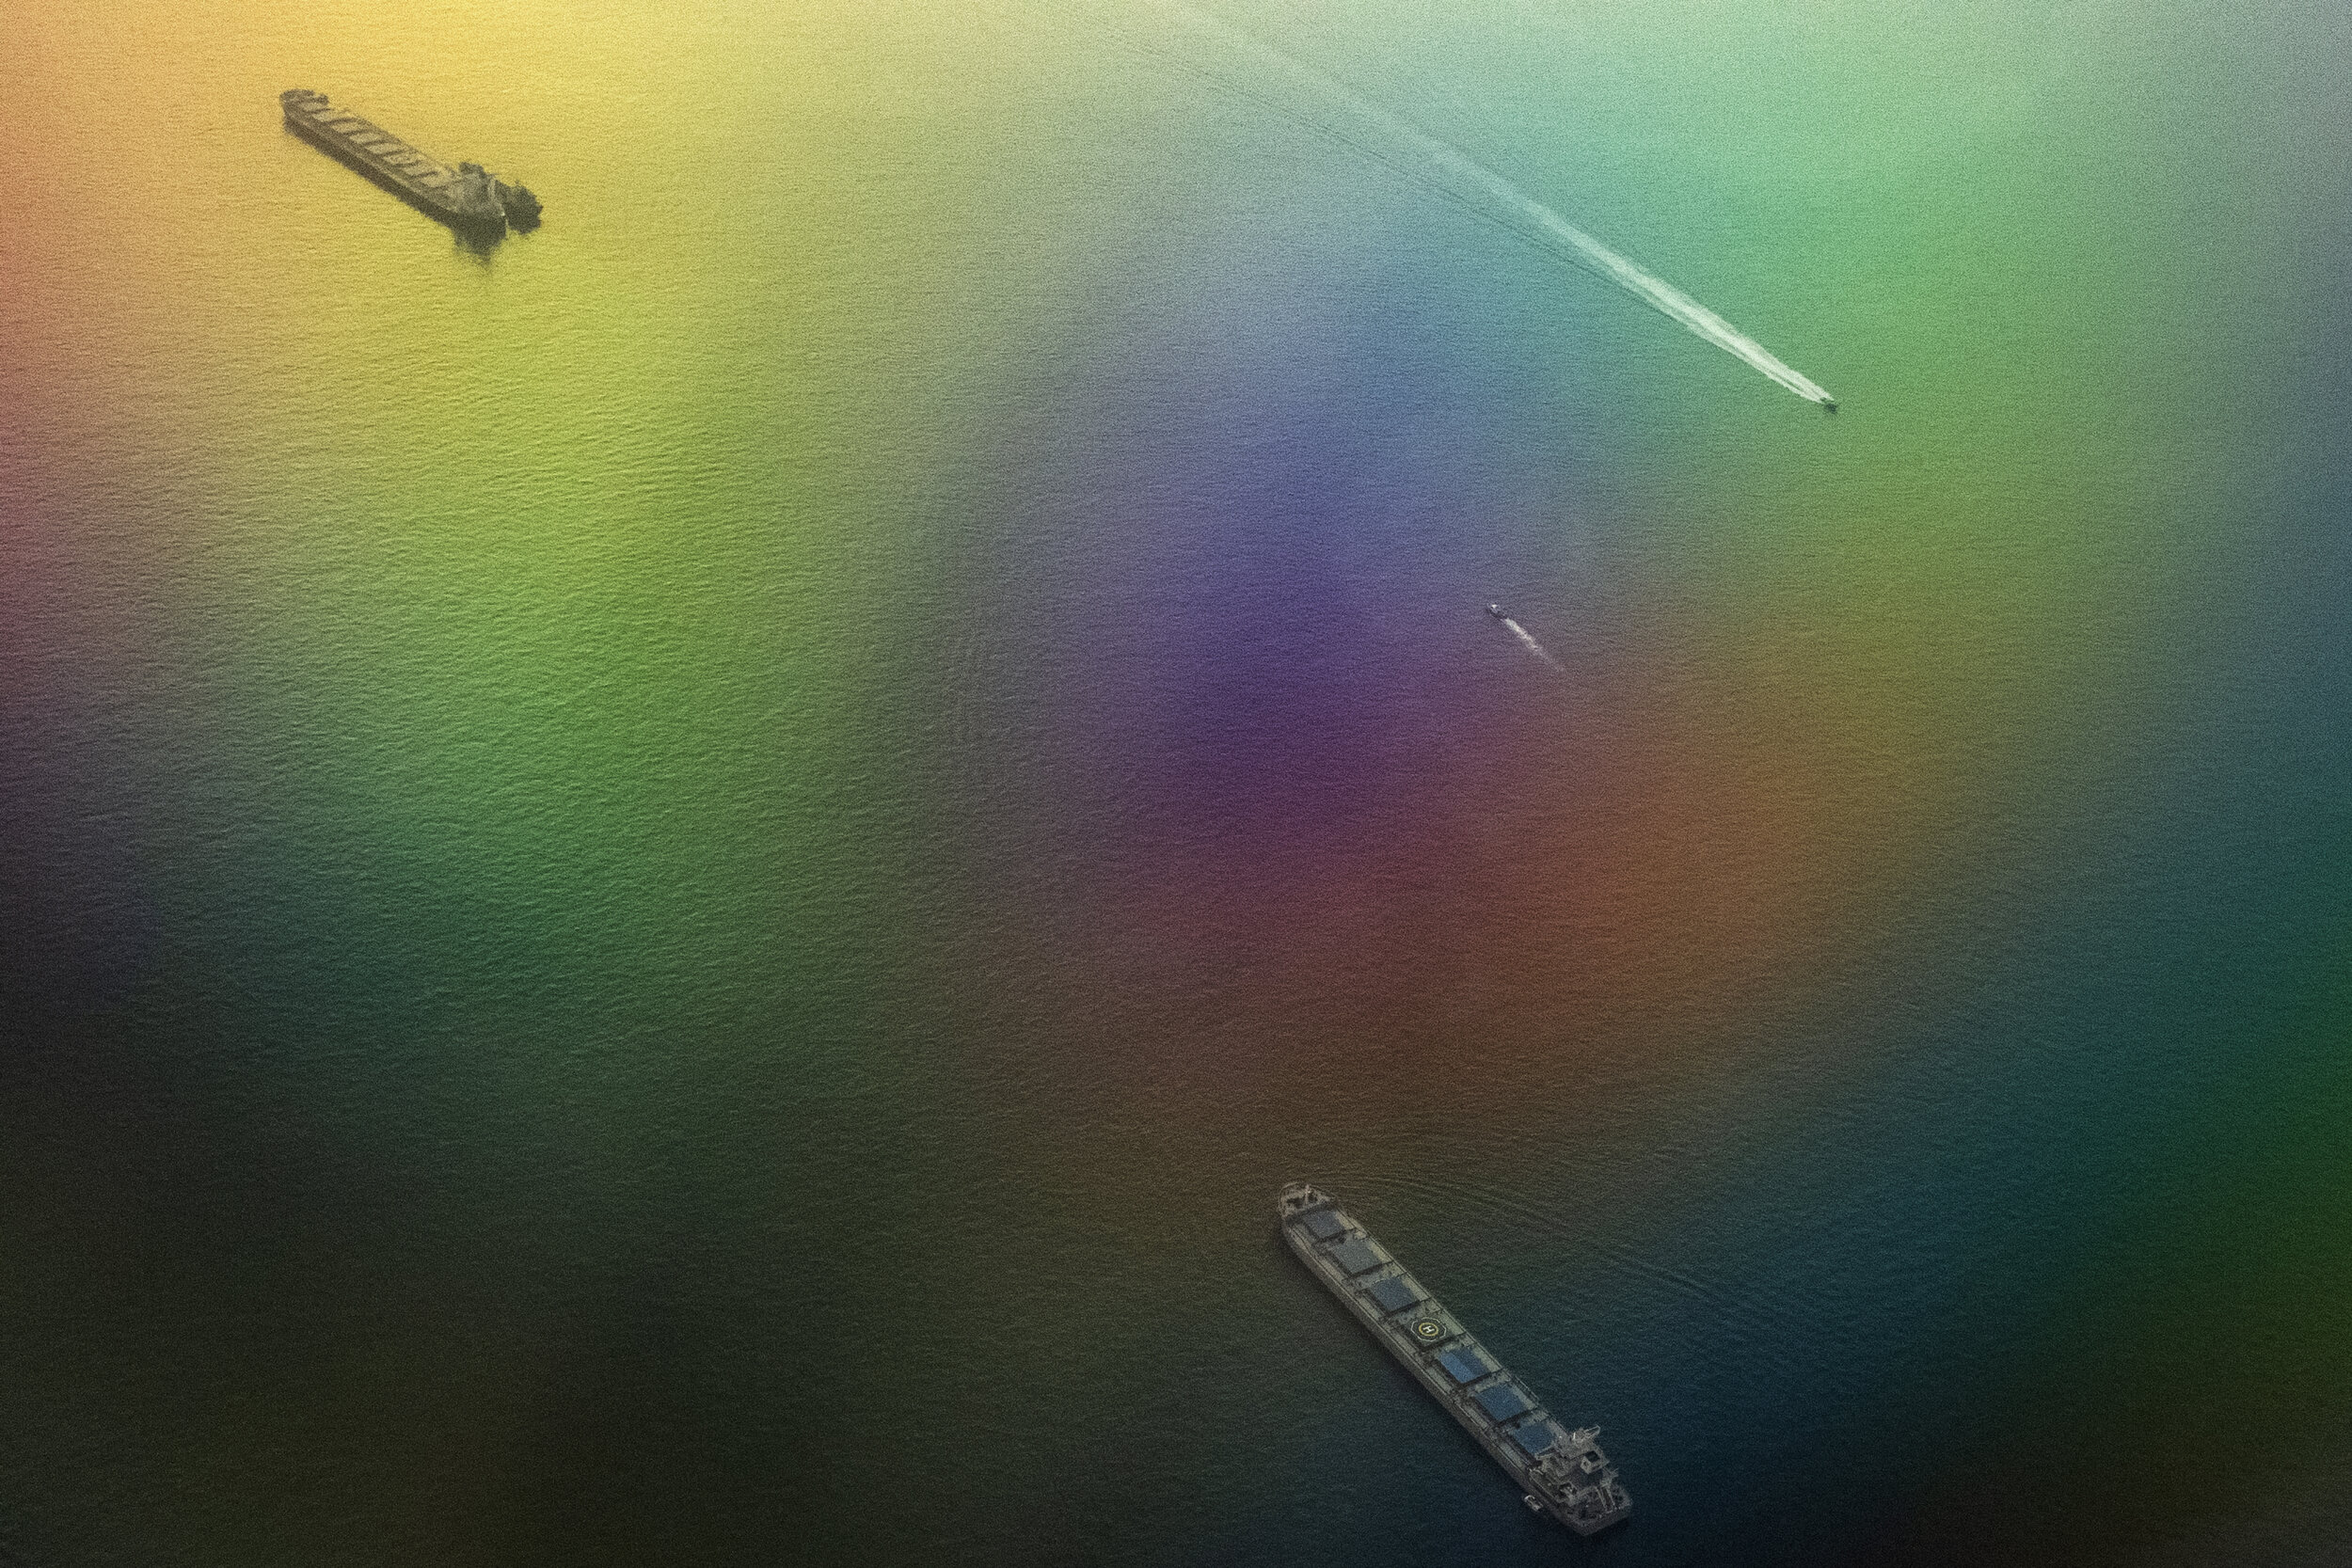  An aerial view of vessels near the Singapore Straits (Taken on an airplane)  